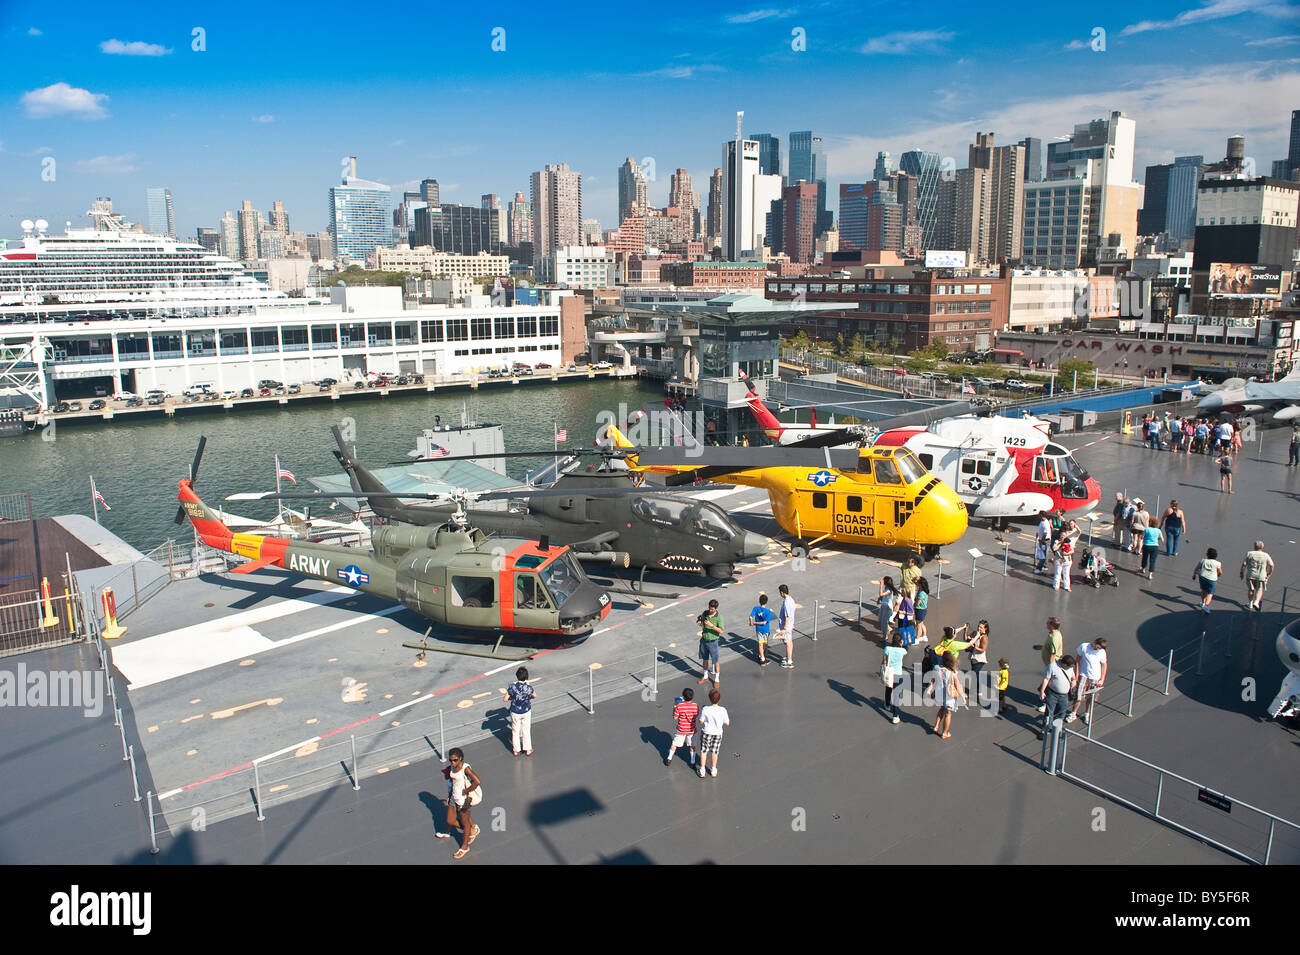 The Aircraft Carrier "Intrepid", Sea-Air-Space Museum, New York City Stock Photo